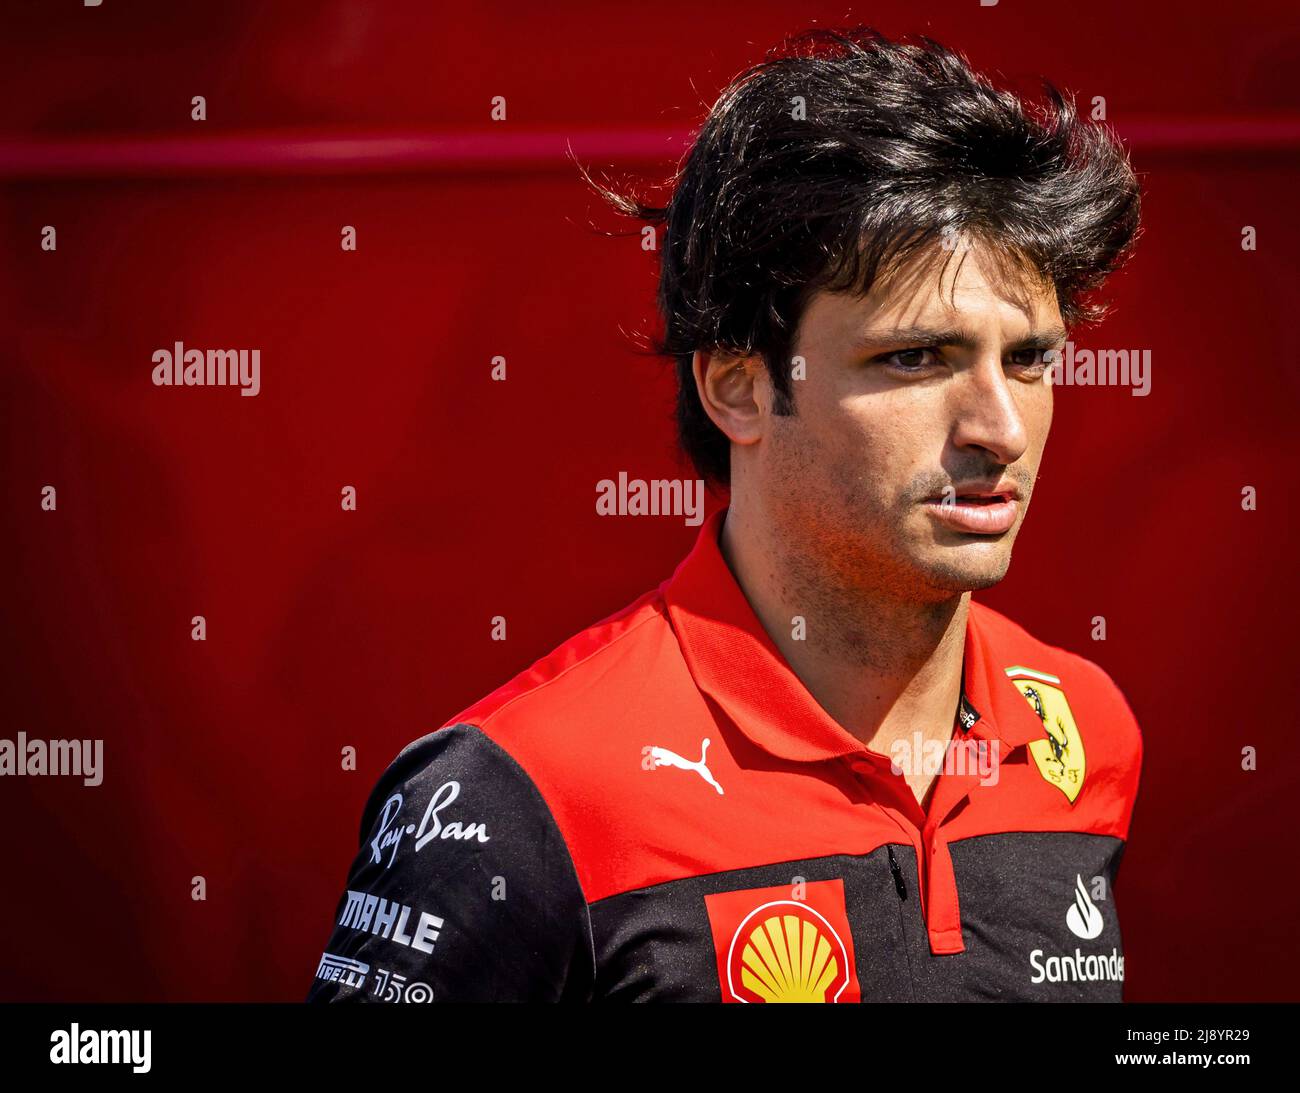 Barcelona, Spain. 19th May, 2022. 2022-05-19 10:41:22 BARCELONA - Carlos Sainz (Ferrari) at the Circuit de Barcelona-Catalunya on the Thursday before the Grand Prix of Spain. REMKO DE WAAL netherlands out - belgium out Credit: ANP/Alamy Live News Stock Photo